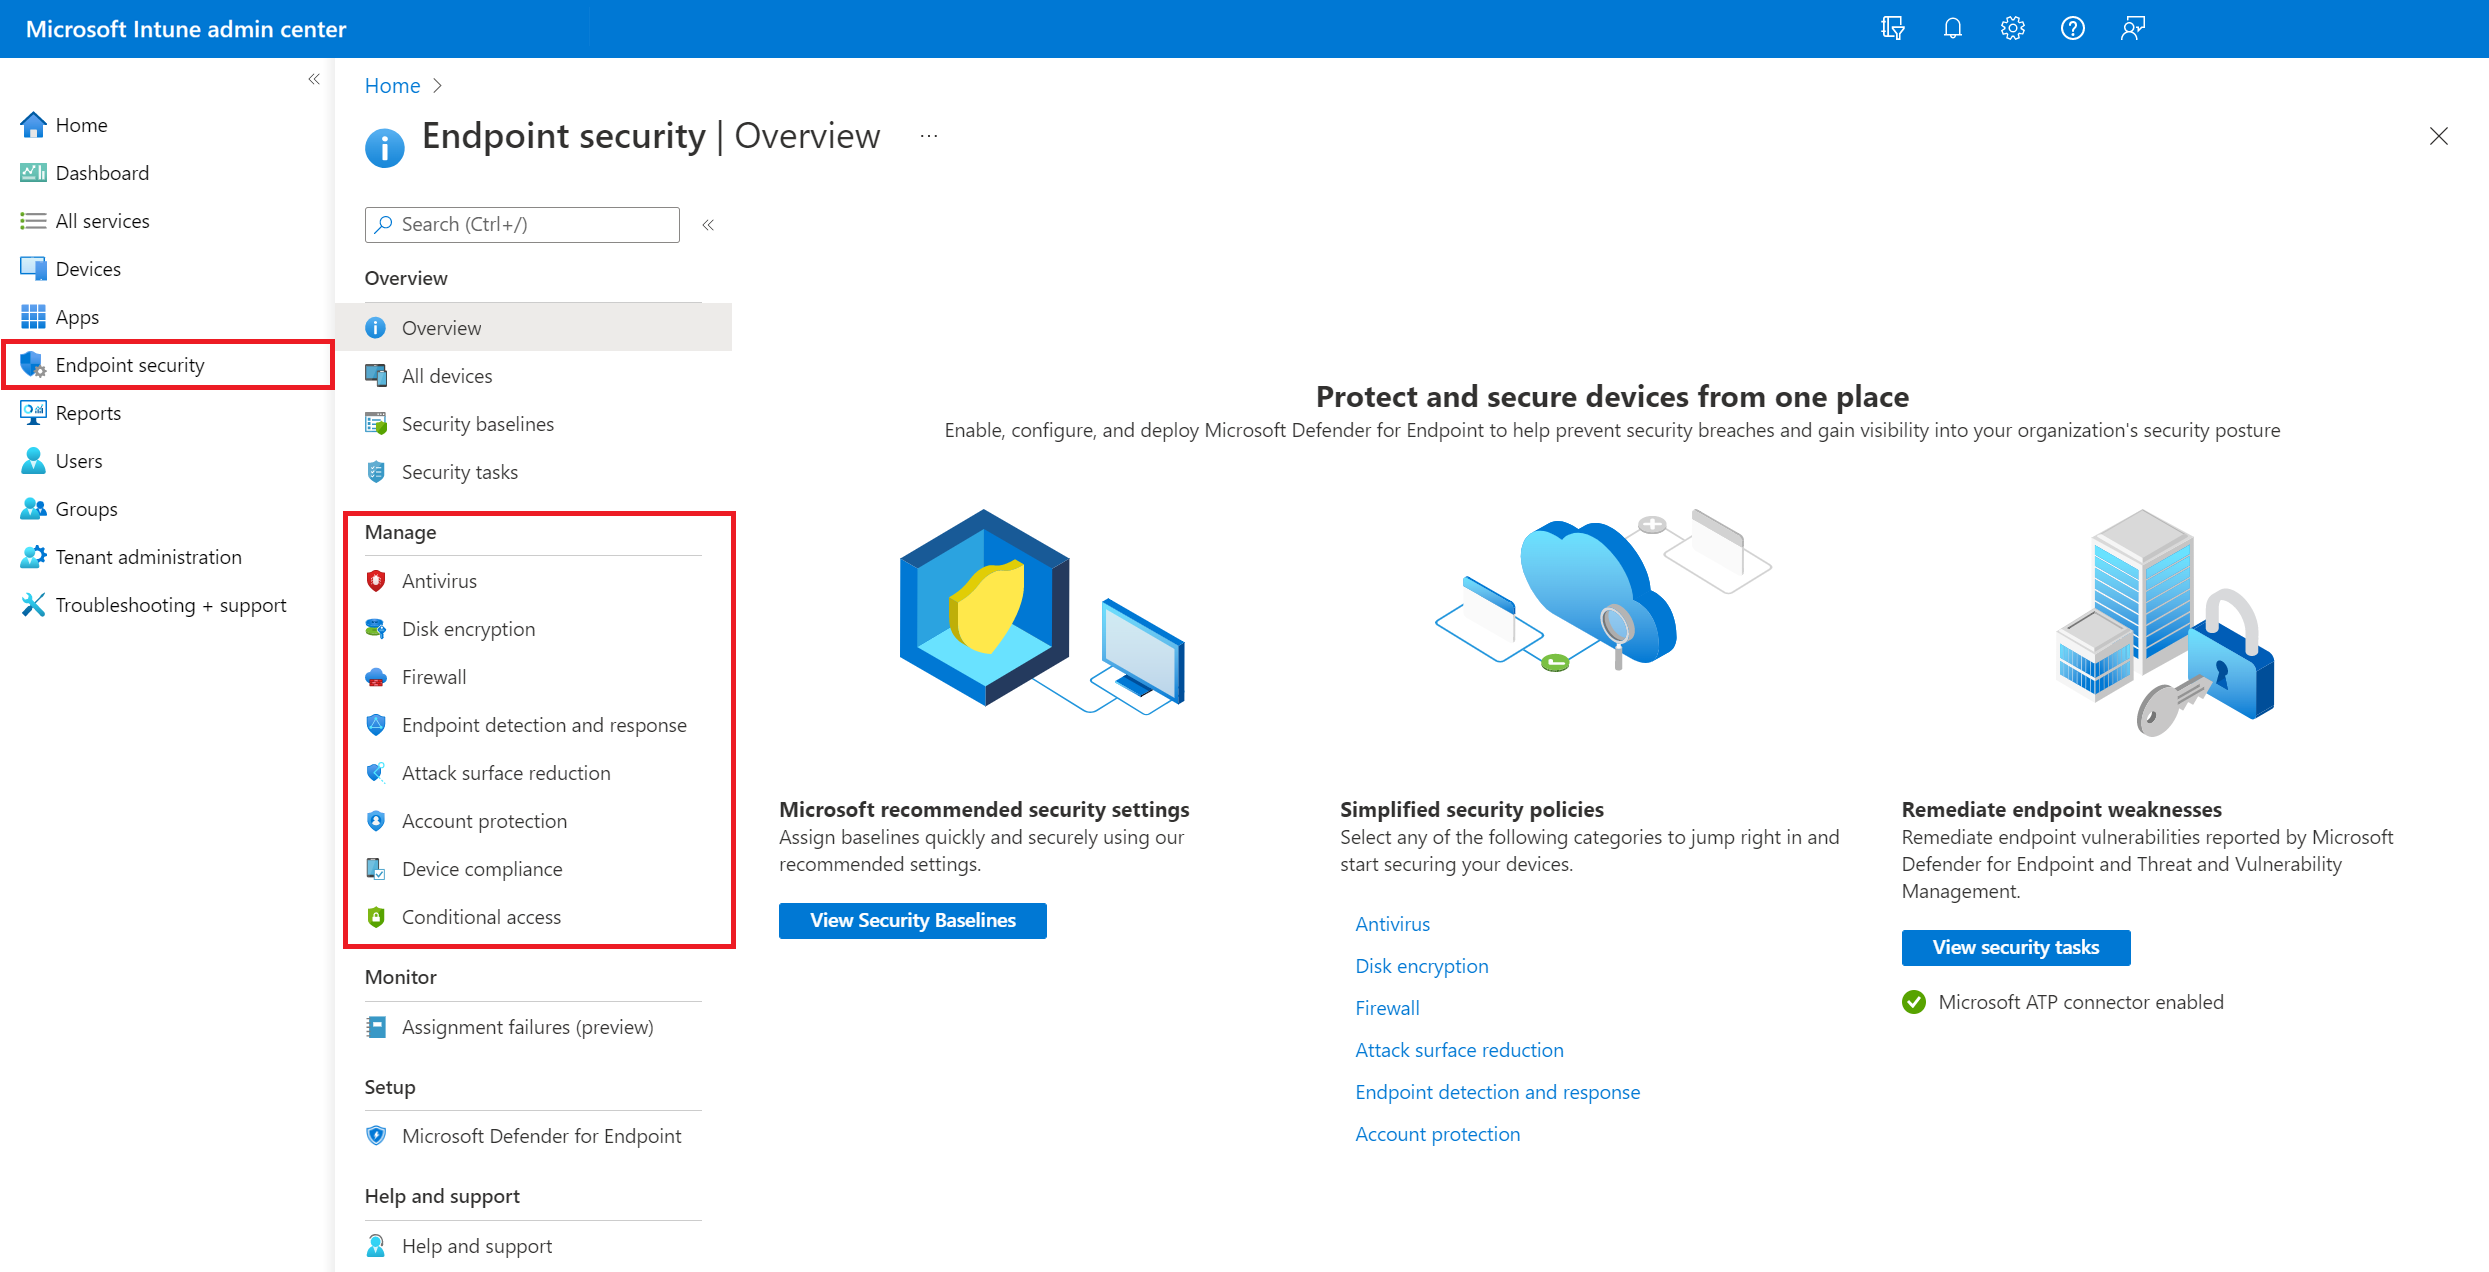 Managing Endpoint security policies in the Microsoft Intune admin center